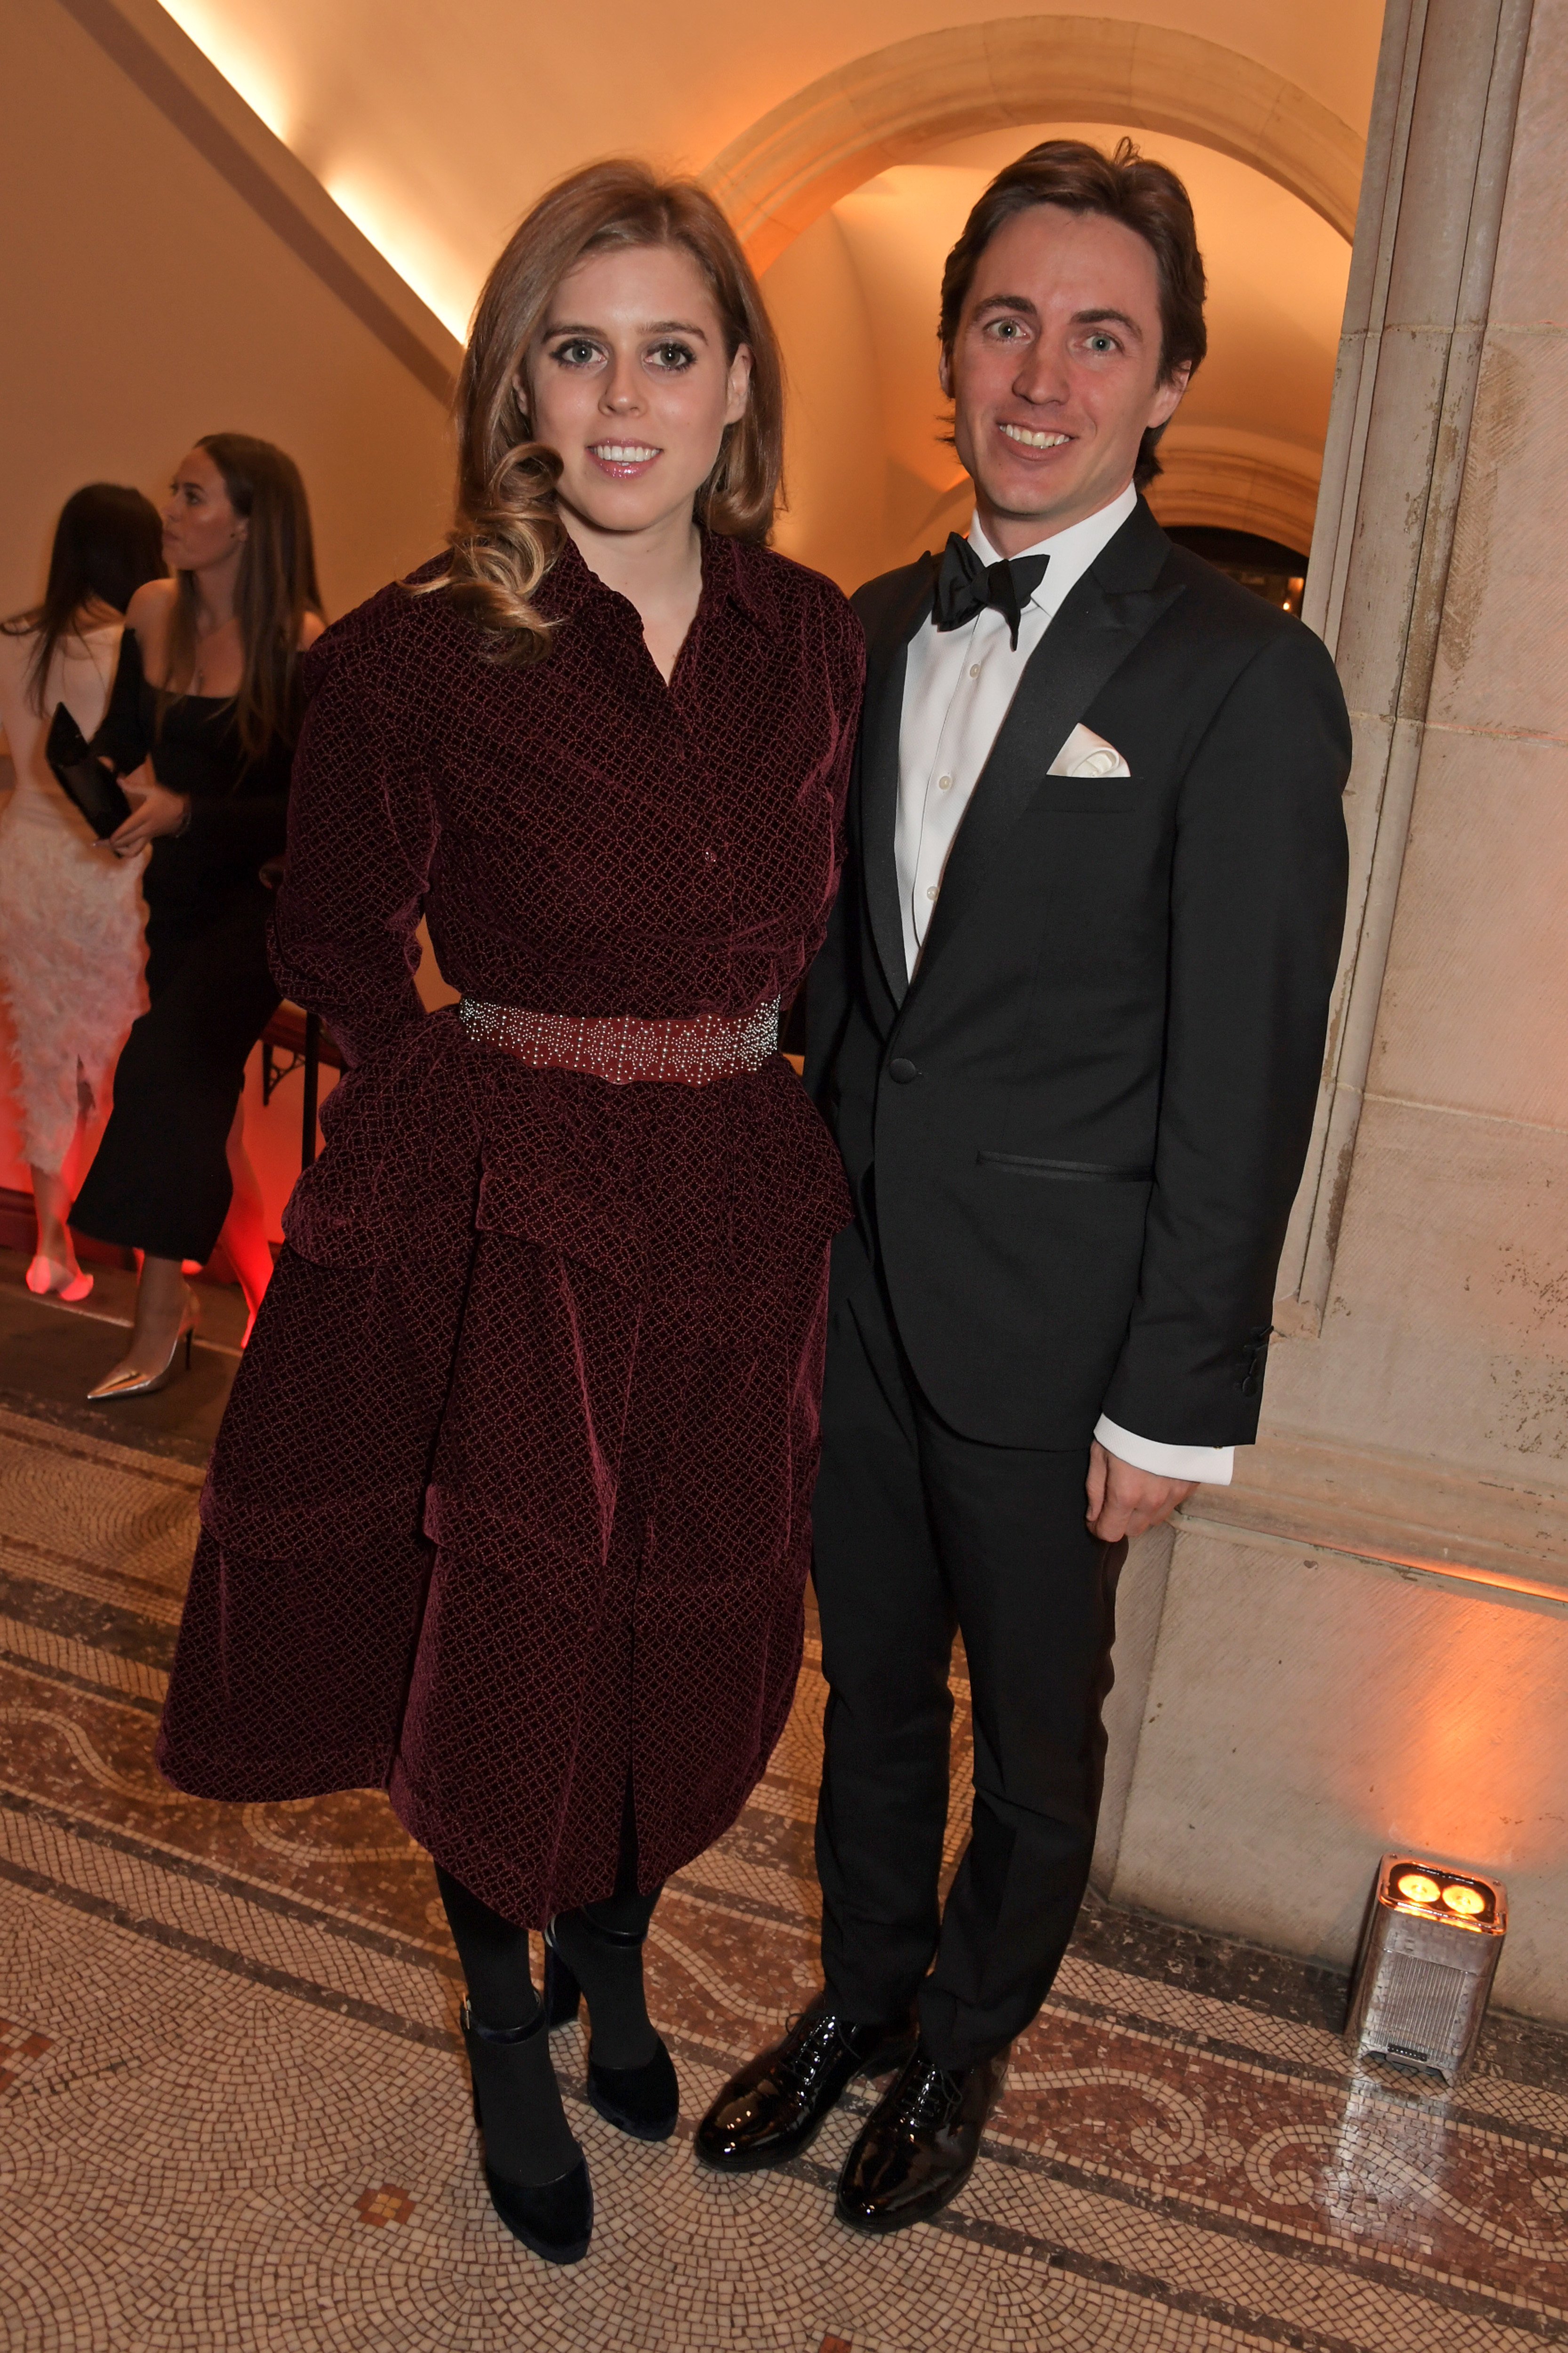 Princess Beatrice and Edoardo Mozzi at London's National Portrait Gallery in March 2019 | Photo: Getty Images